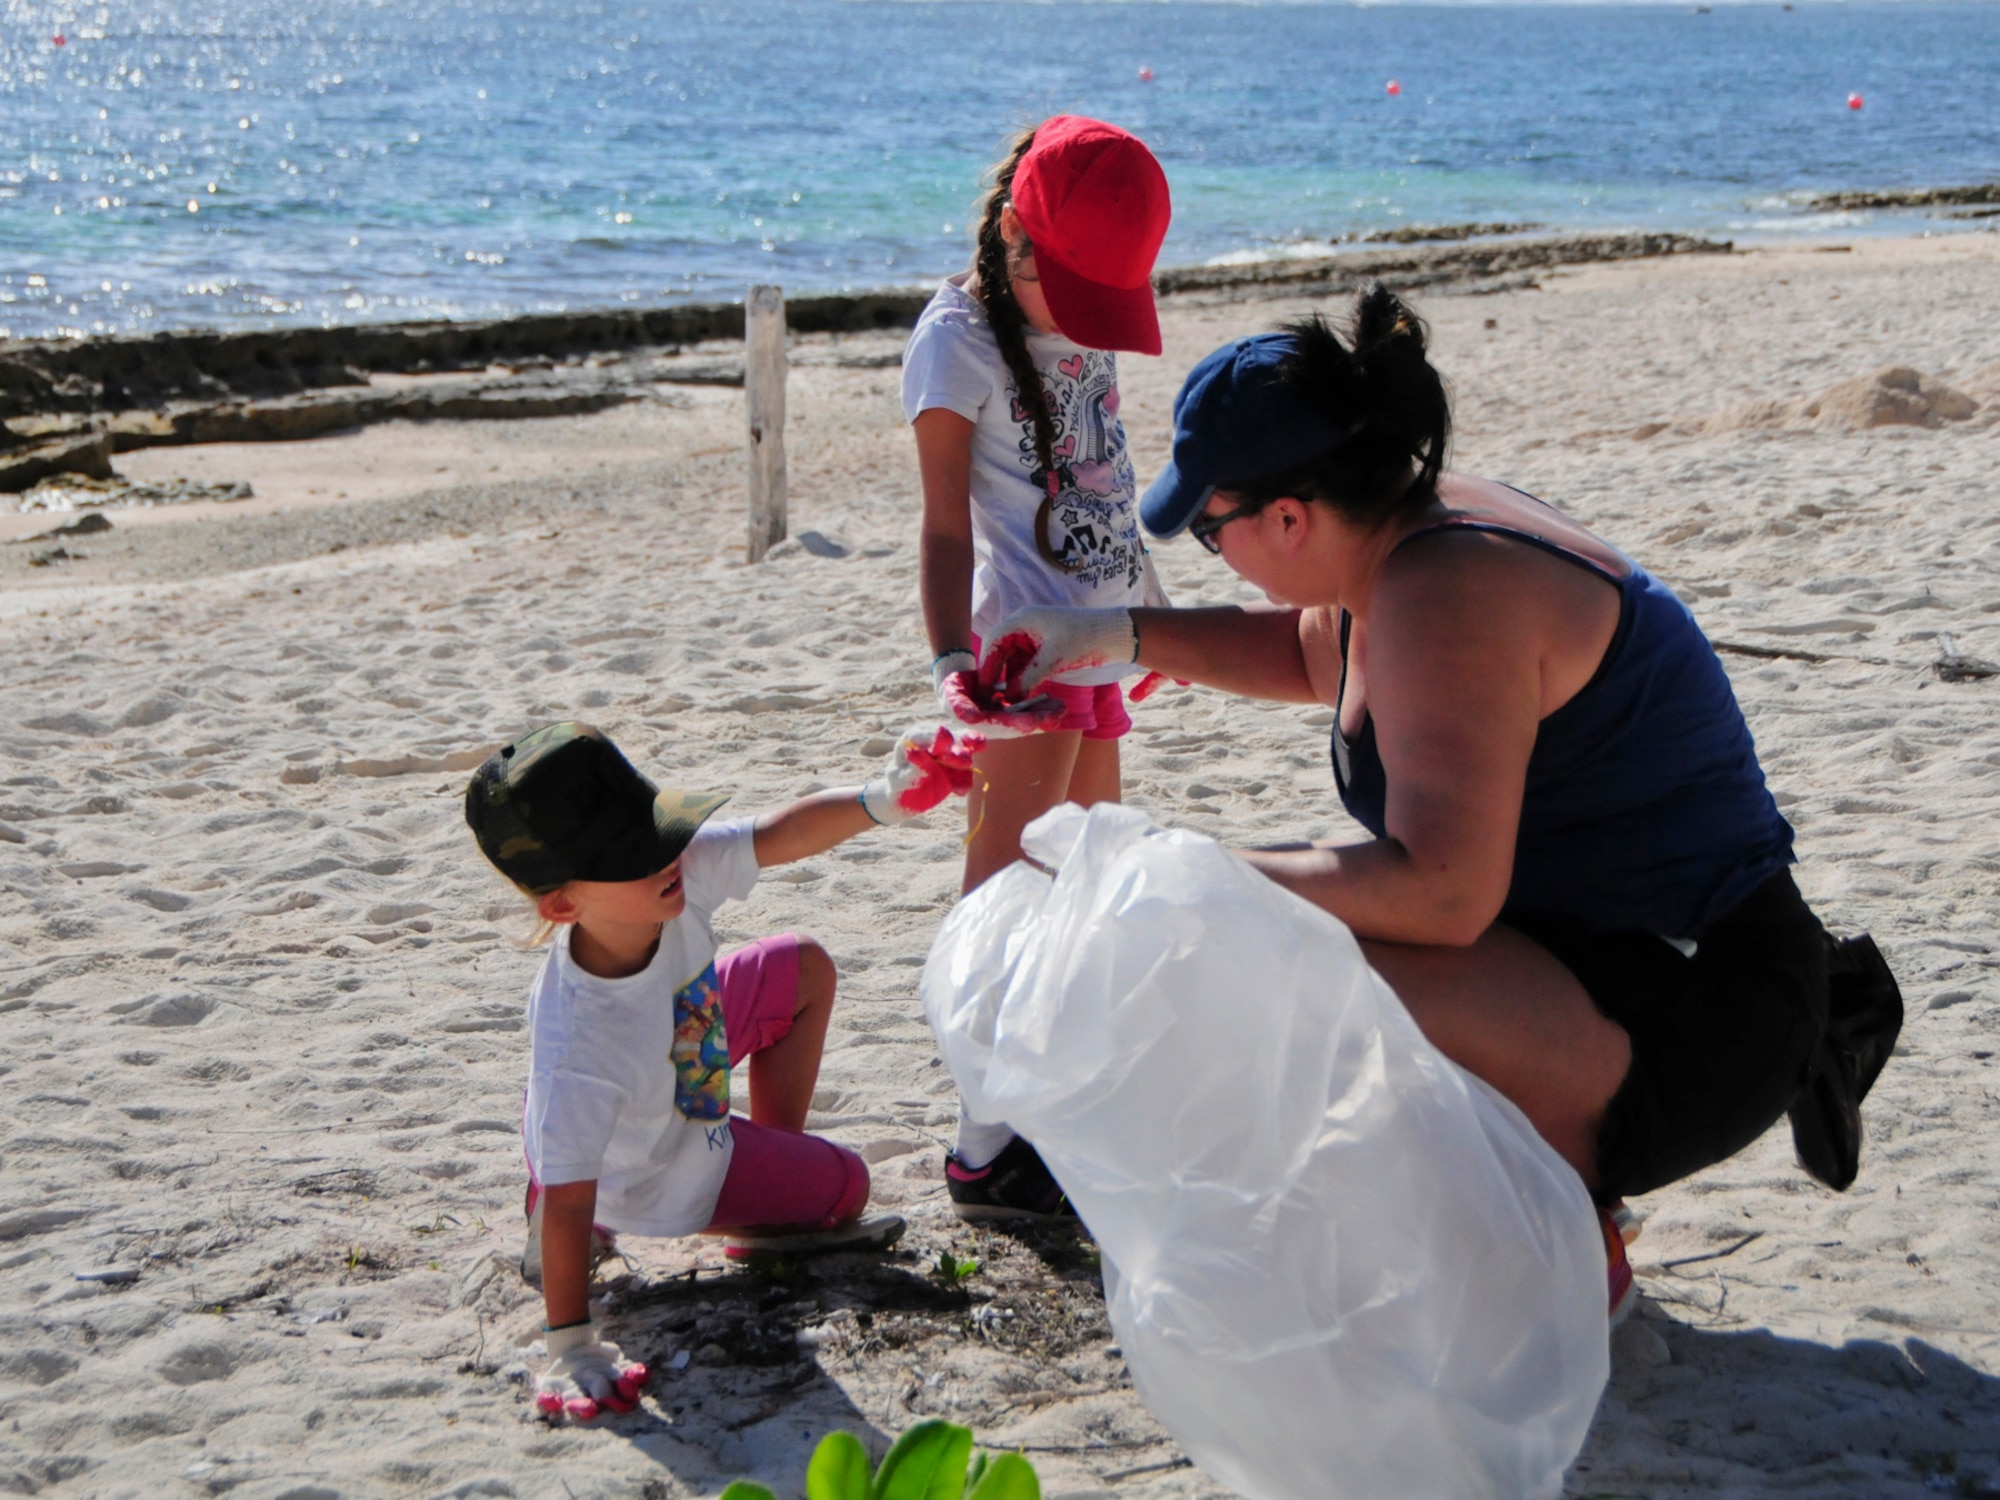 A family works together to collect and sort trash during the Earth Day cleanup on Tarague Beach at Andersen Air Force Base, Guam, April 21, 2013. Along with collecting trash, volunteers tracked the amount and brands of the waste they collected, which was sent to the U.S. Environmental Protection Agency Regions 9 for their study on sources of rubbish in oceans. (U.S. Air Force photo by Airman 1st Class Marianique Santos/Released)